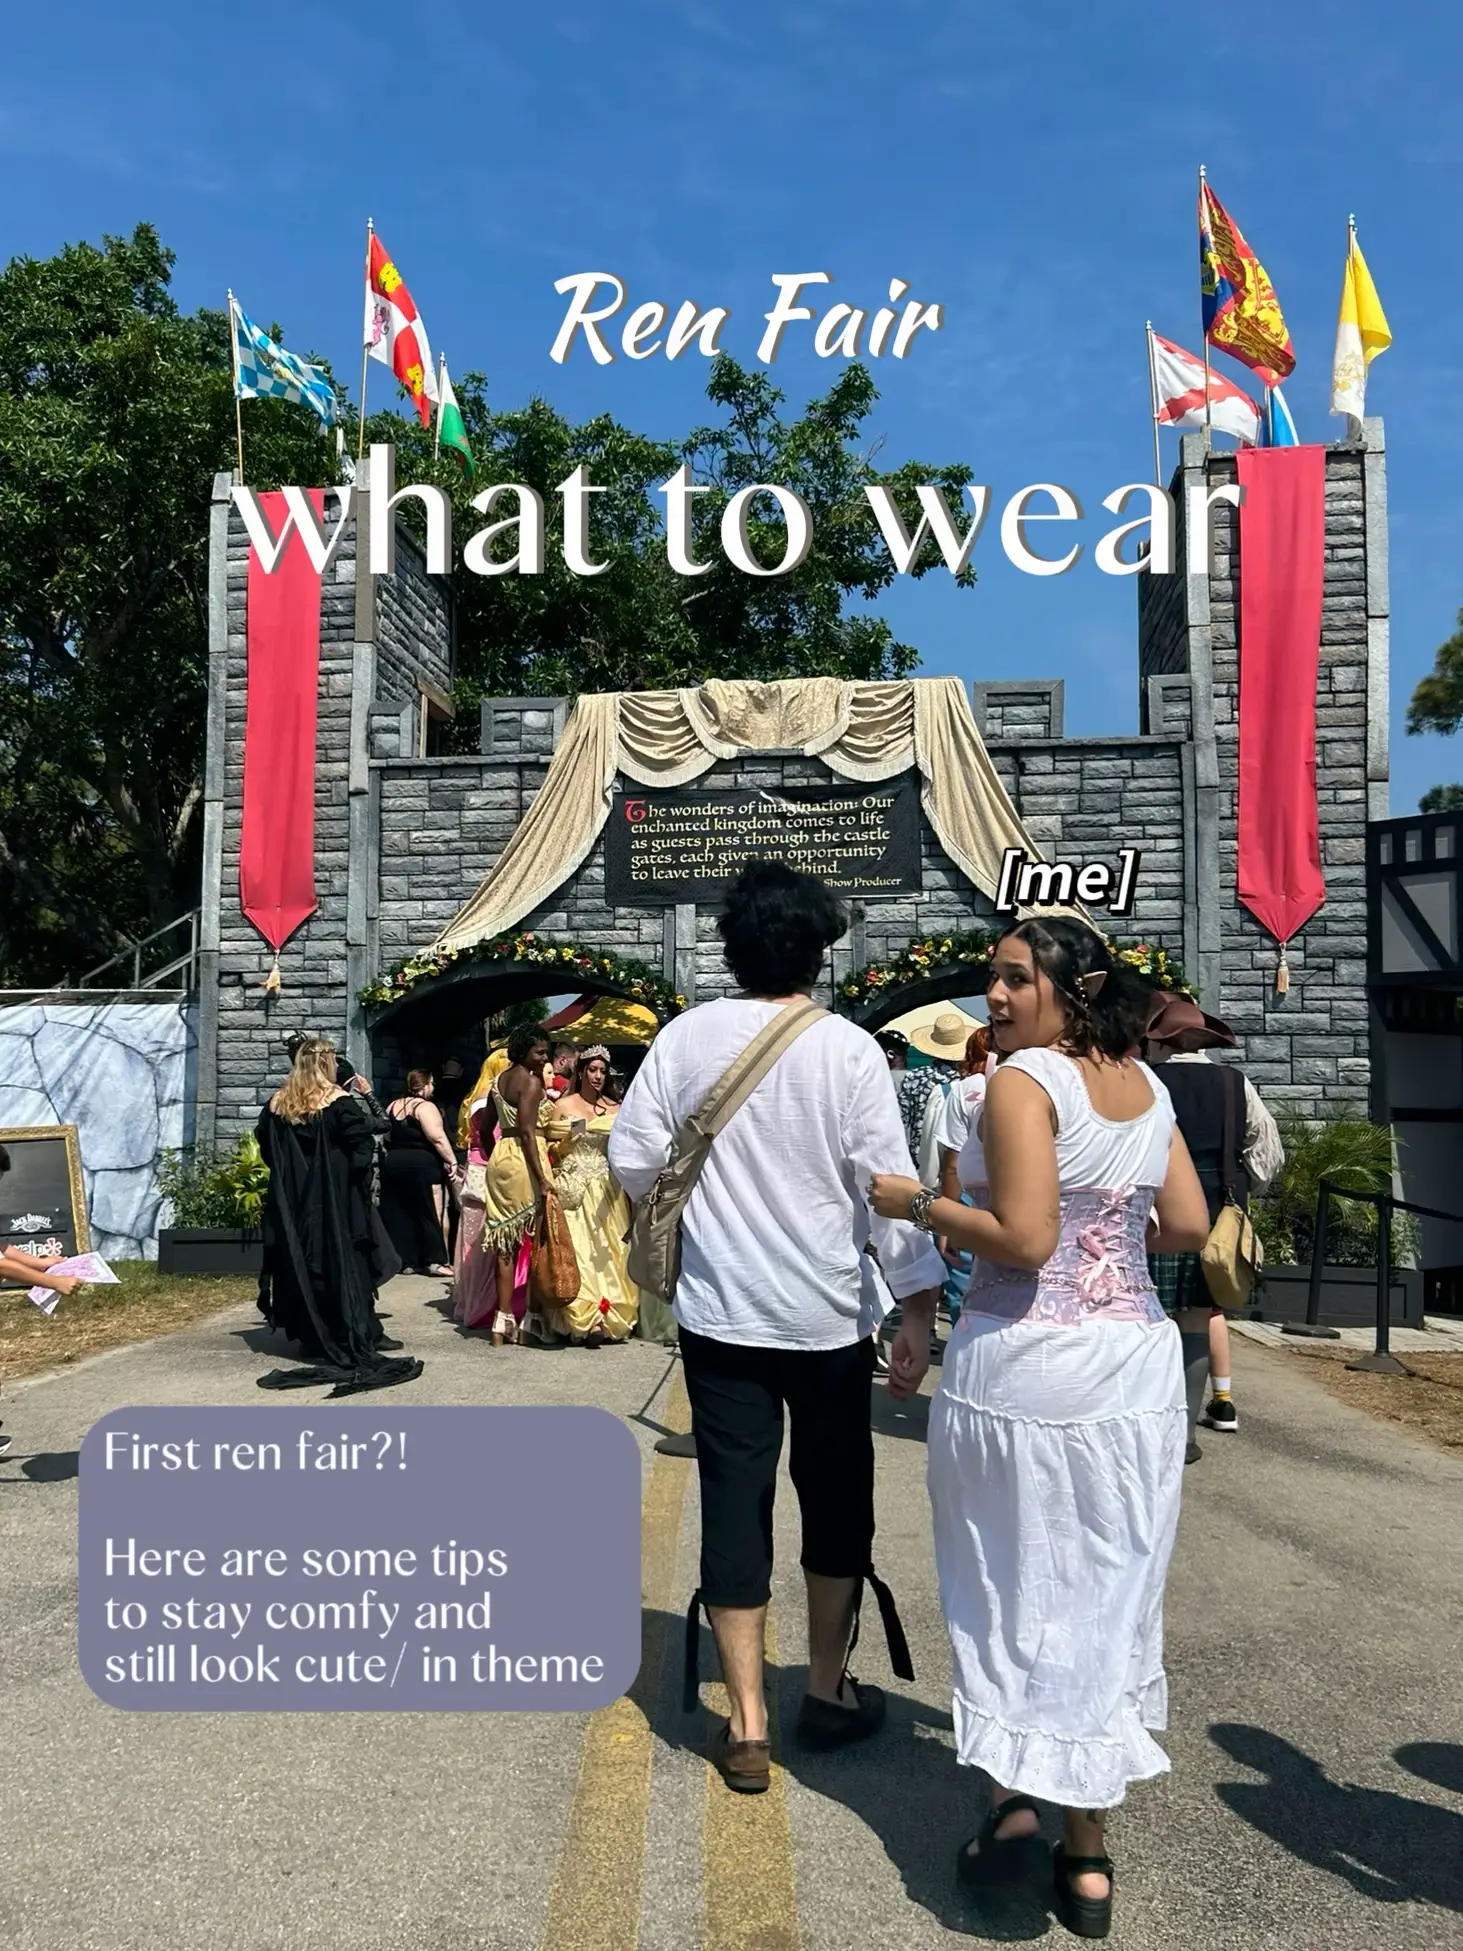 I would like to go to my first Ren Faire! I have a lolita dress I'd love to  wear, but is it alright to do so? : r/renfaire